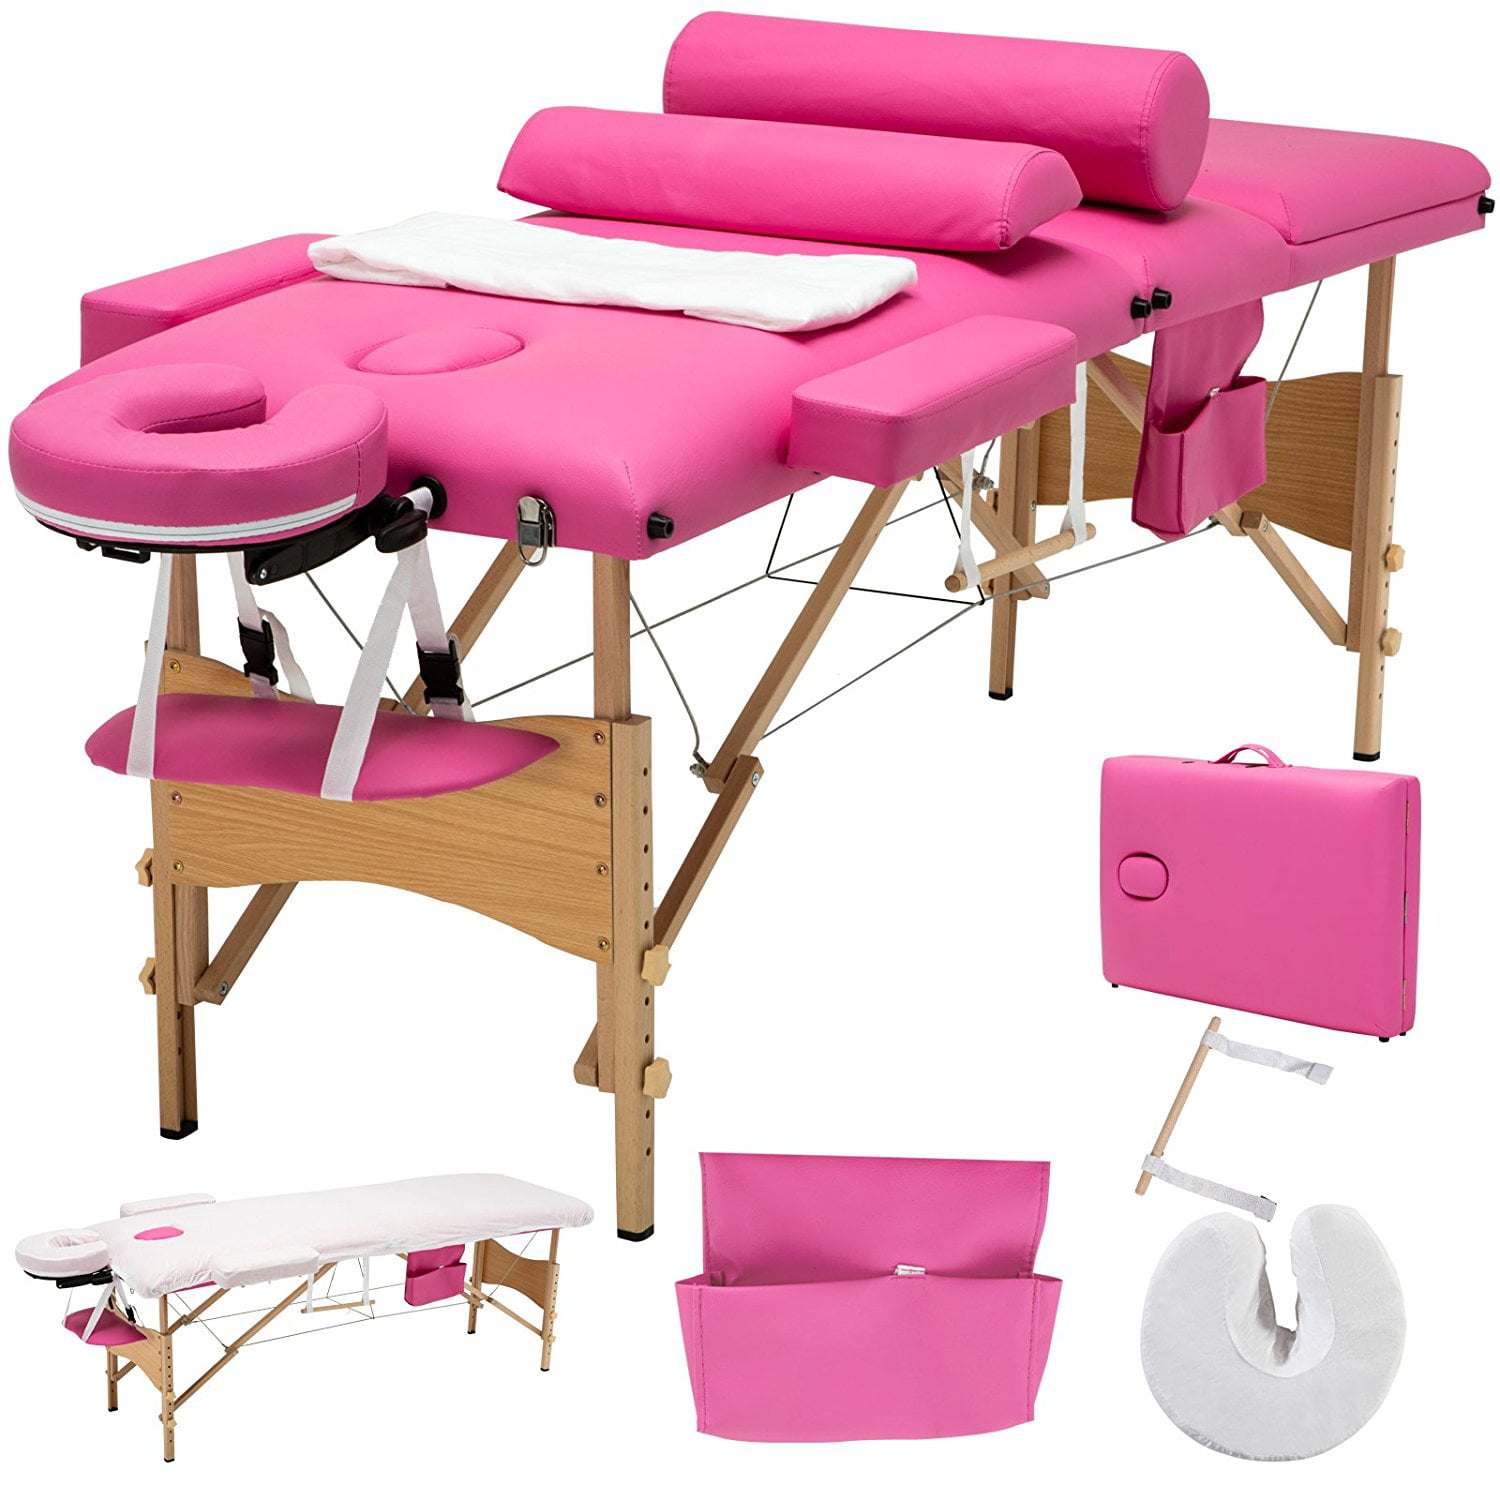 Mecor Folding Massage Table 84professional Massage Bed Luxury Model With Carrying Bag